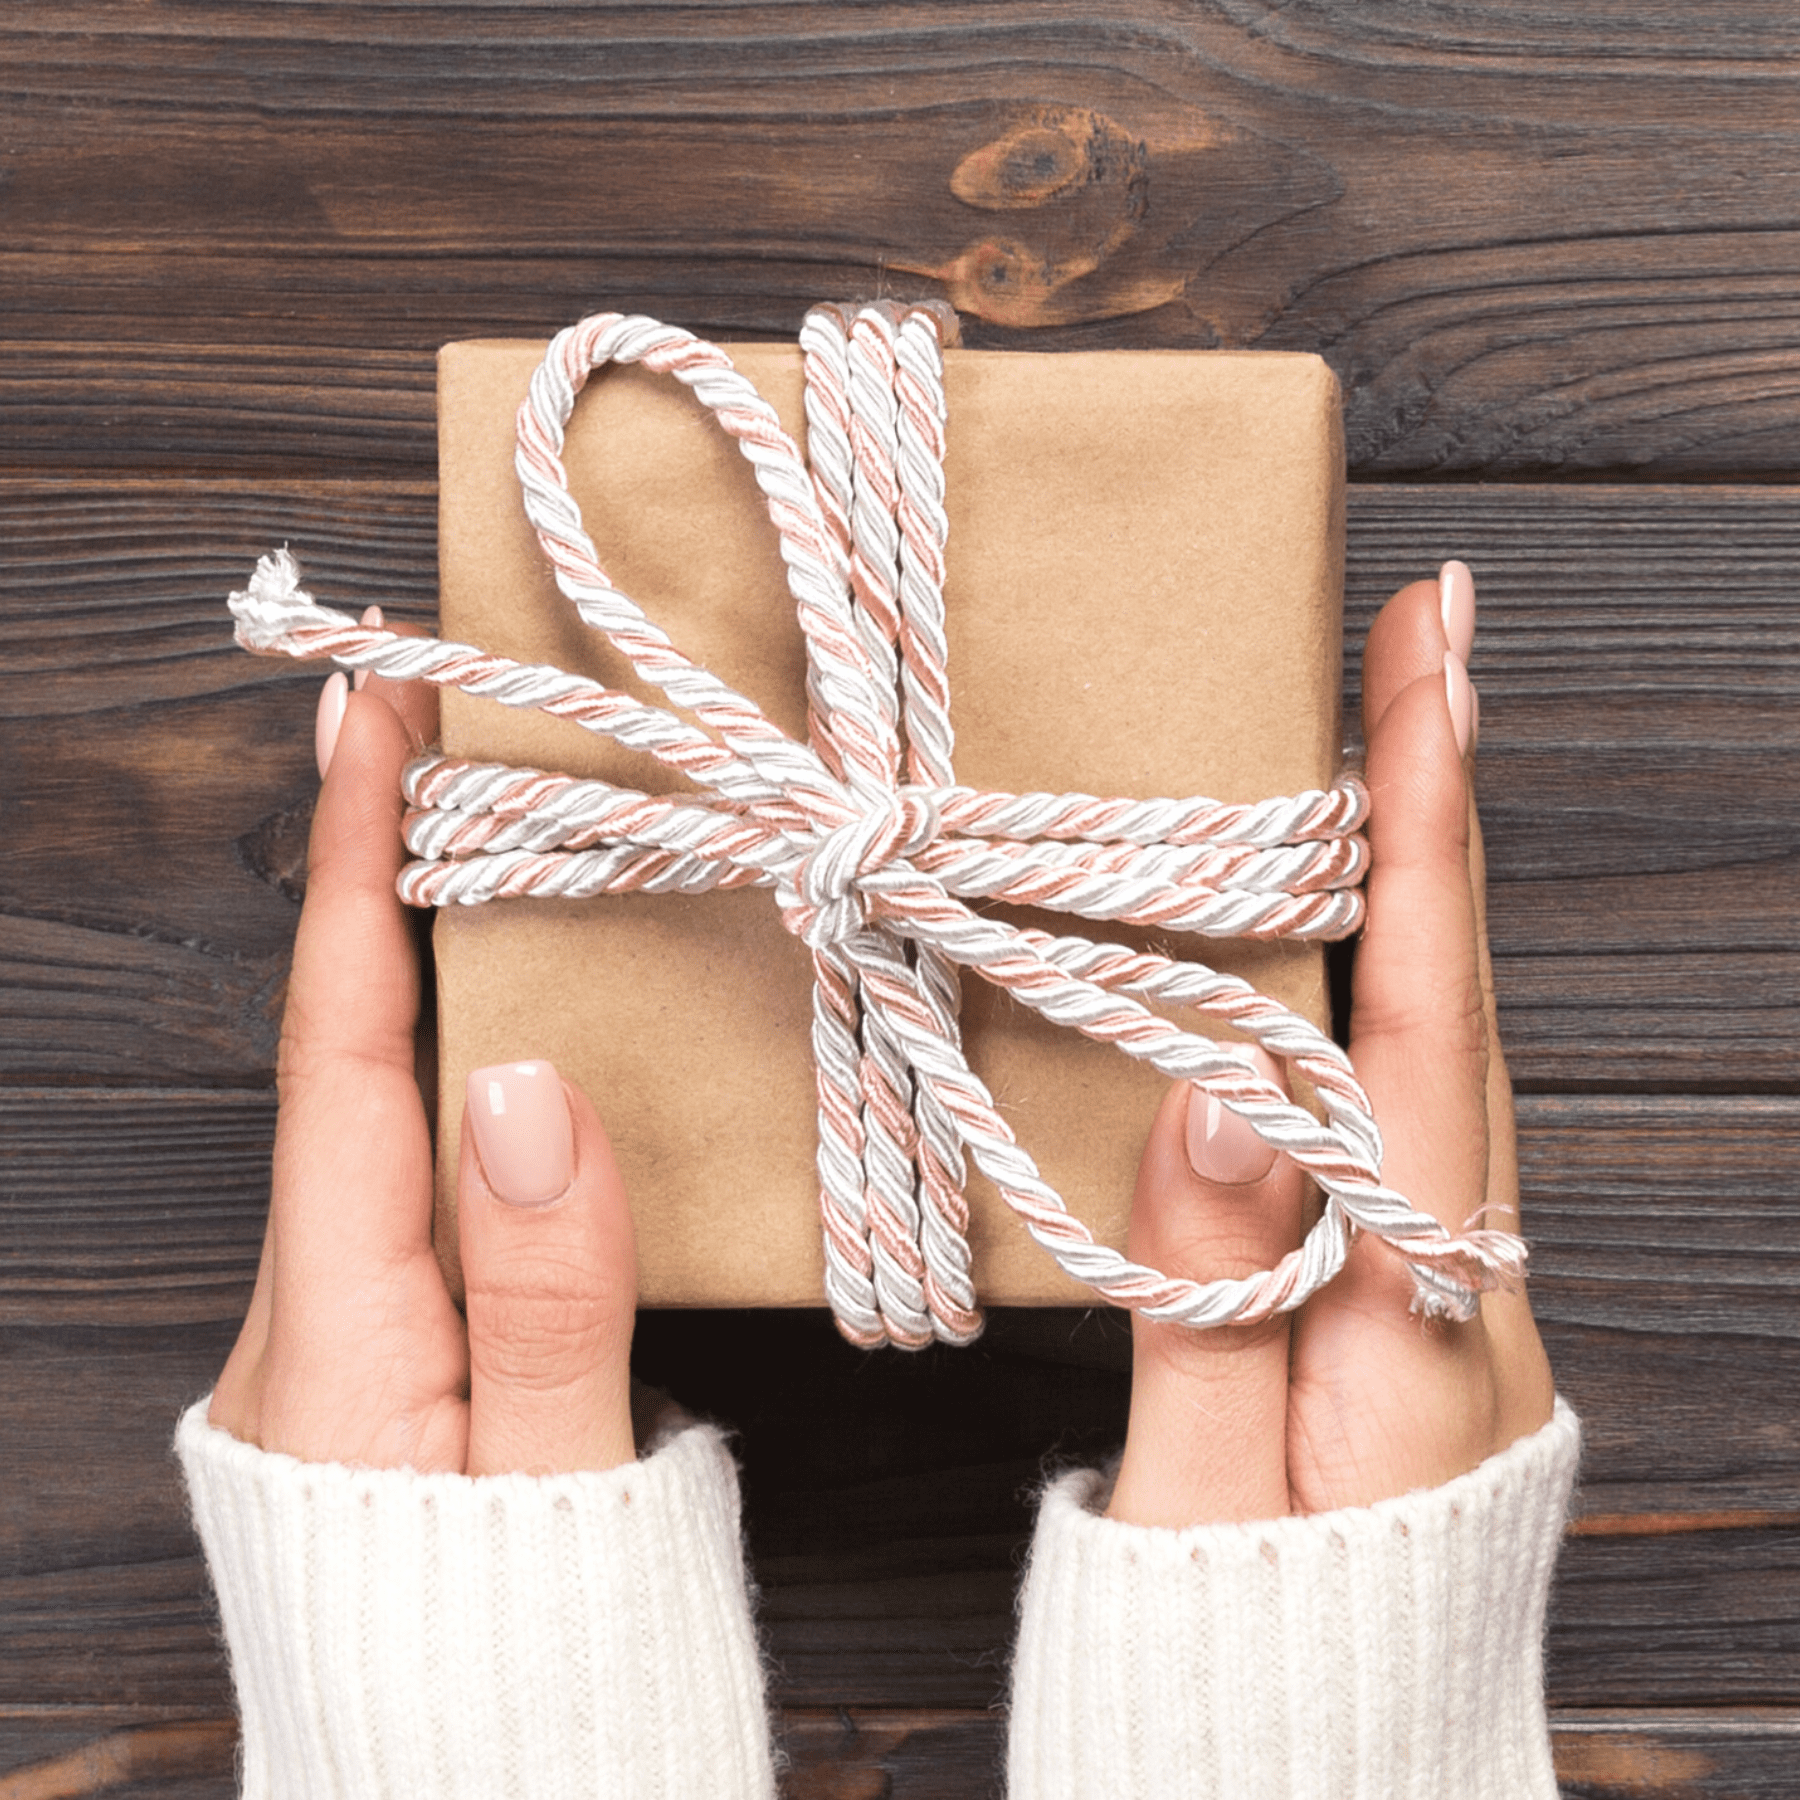 woman's hands holding a wrapped gift